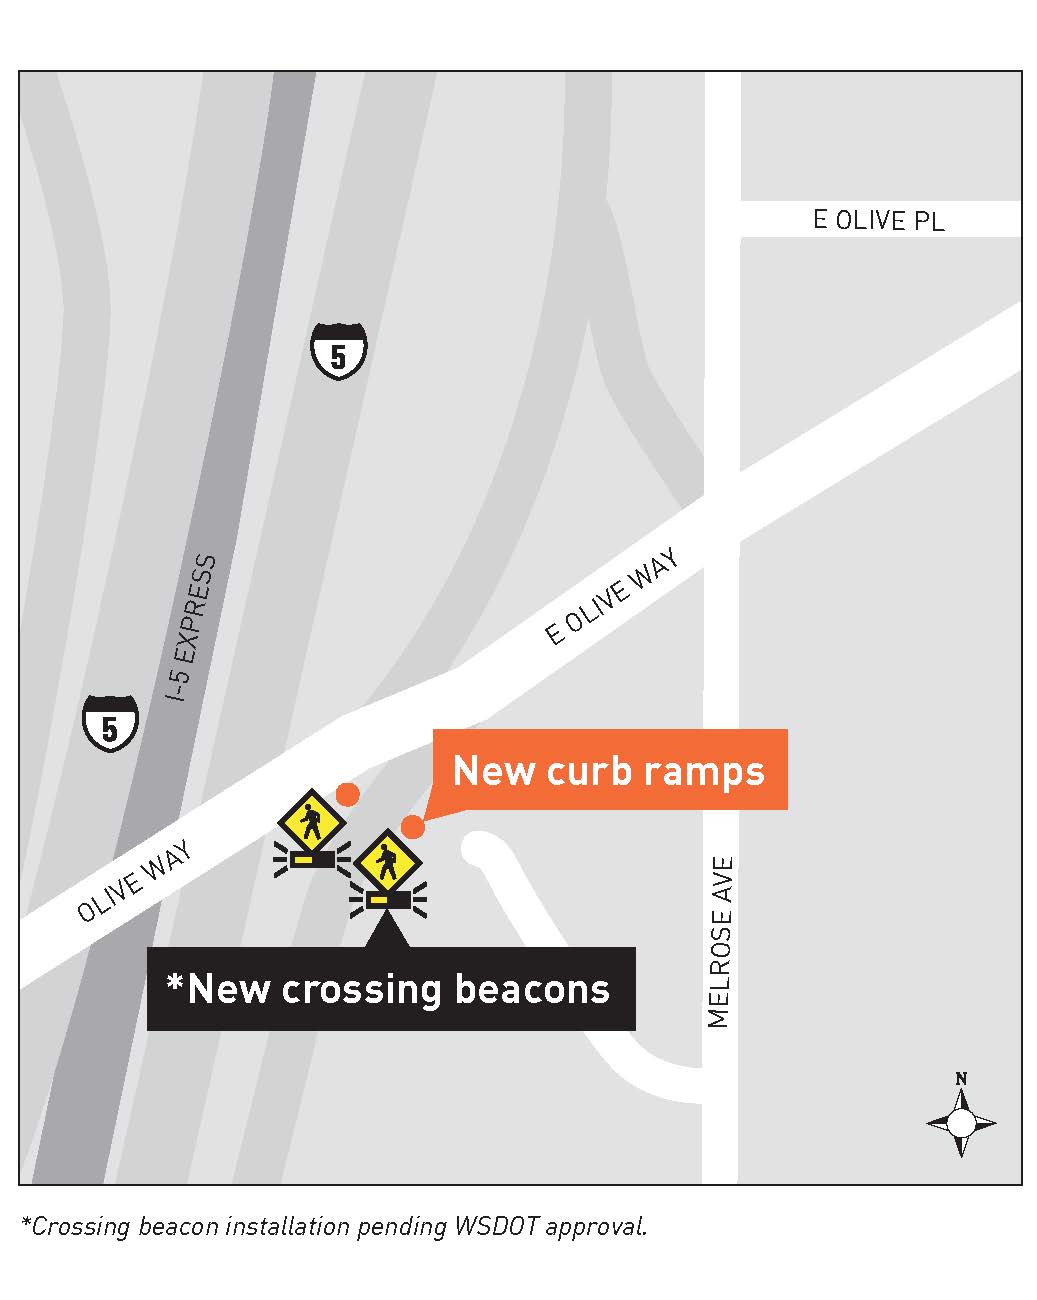 I5 offramp onto Olive Way, crossing upgrades map